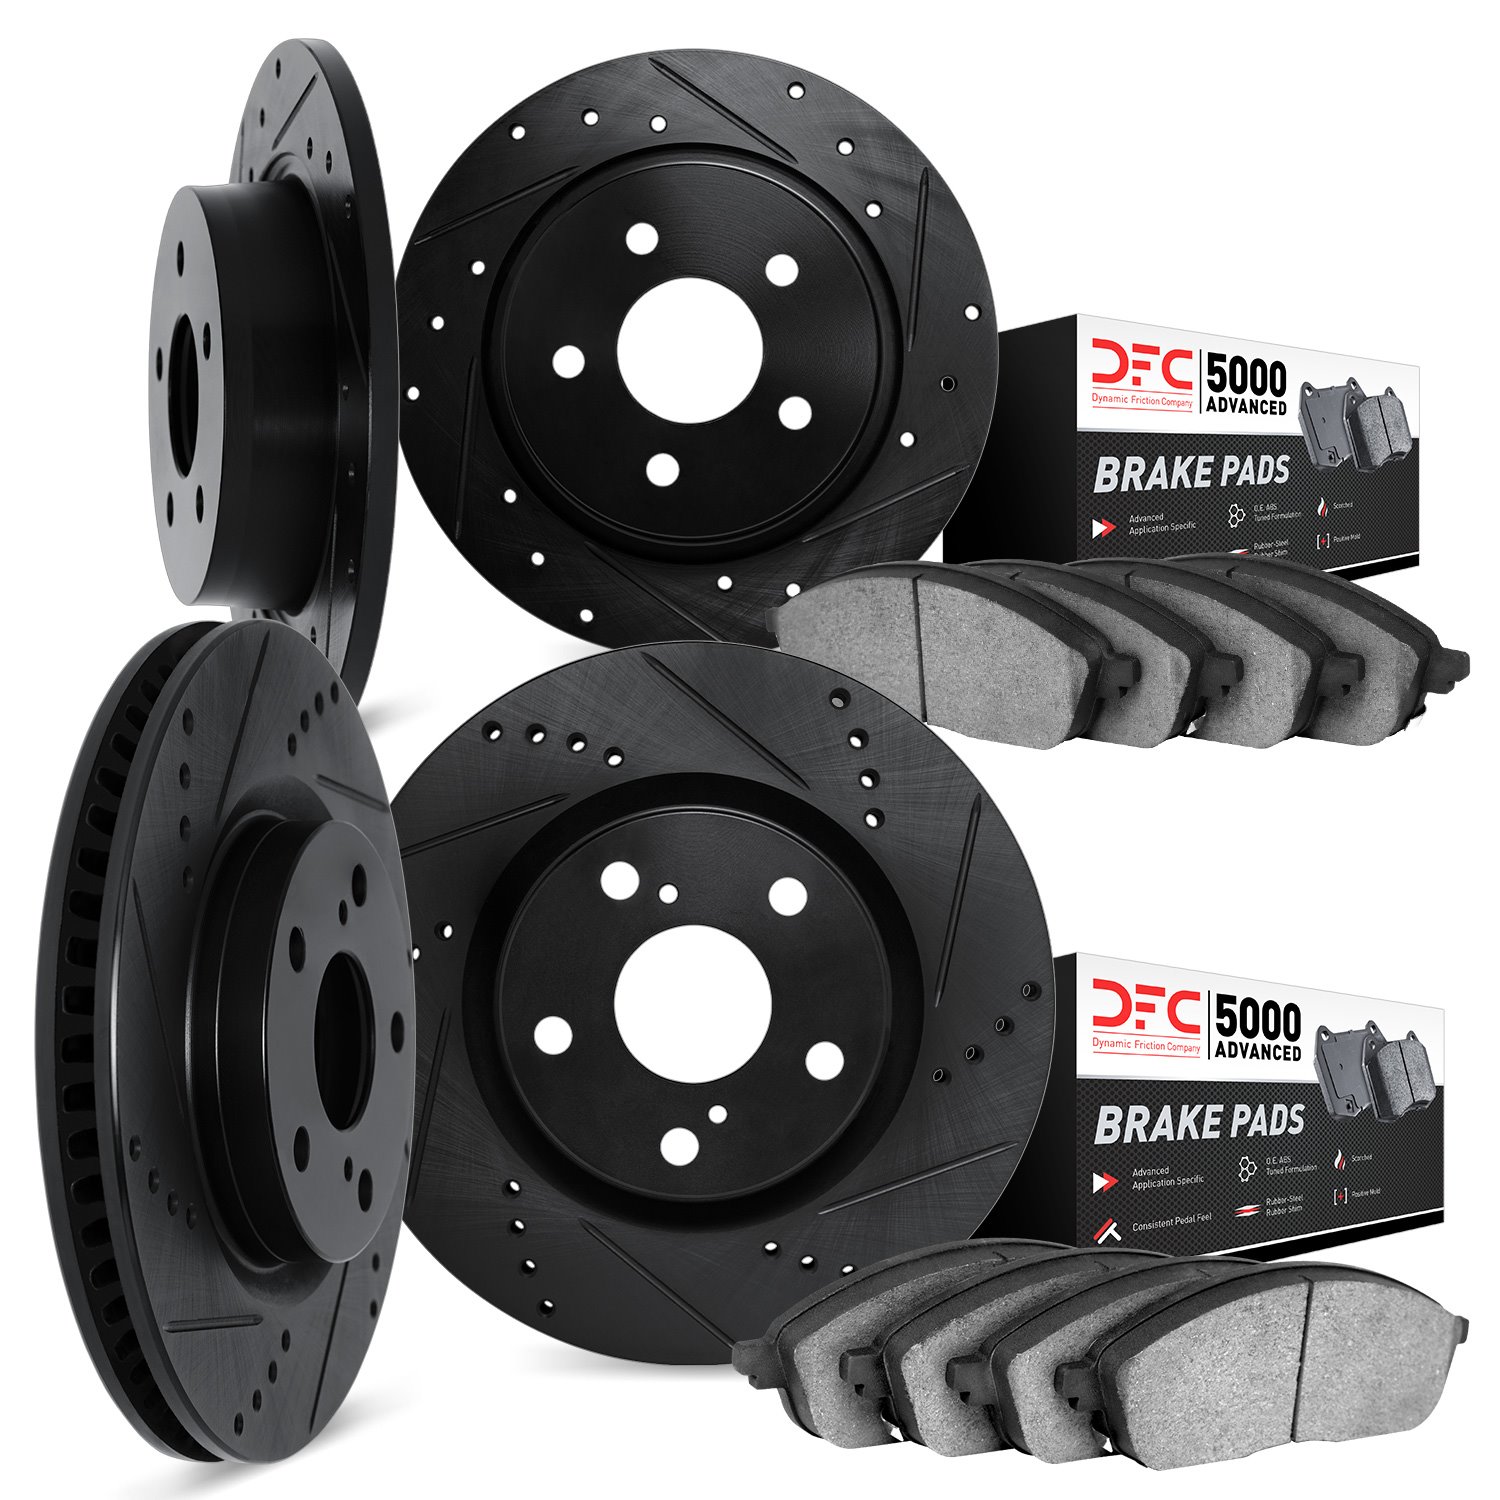 8504-11003 Drilled/Slotted Brake Rotors w/5000 Advanced Brake Pads Kit [Black], 1994-2016 Land Rover, Position: Front and Rear